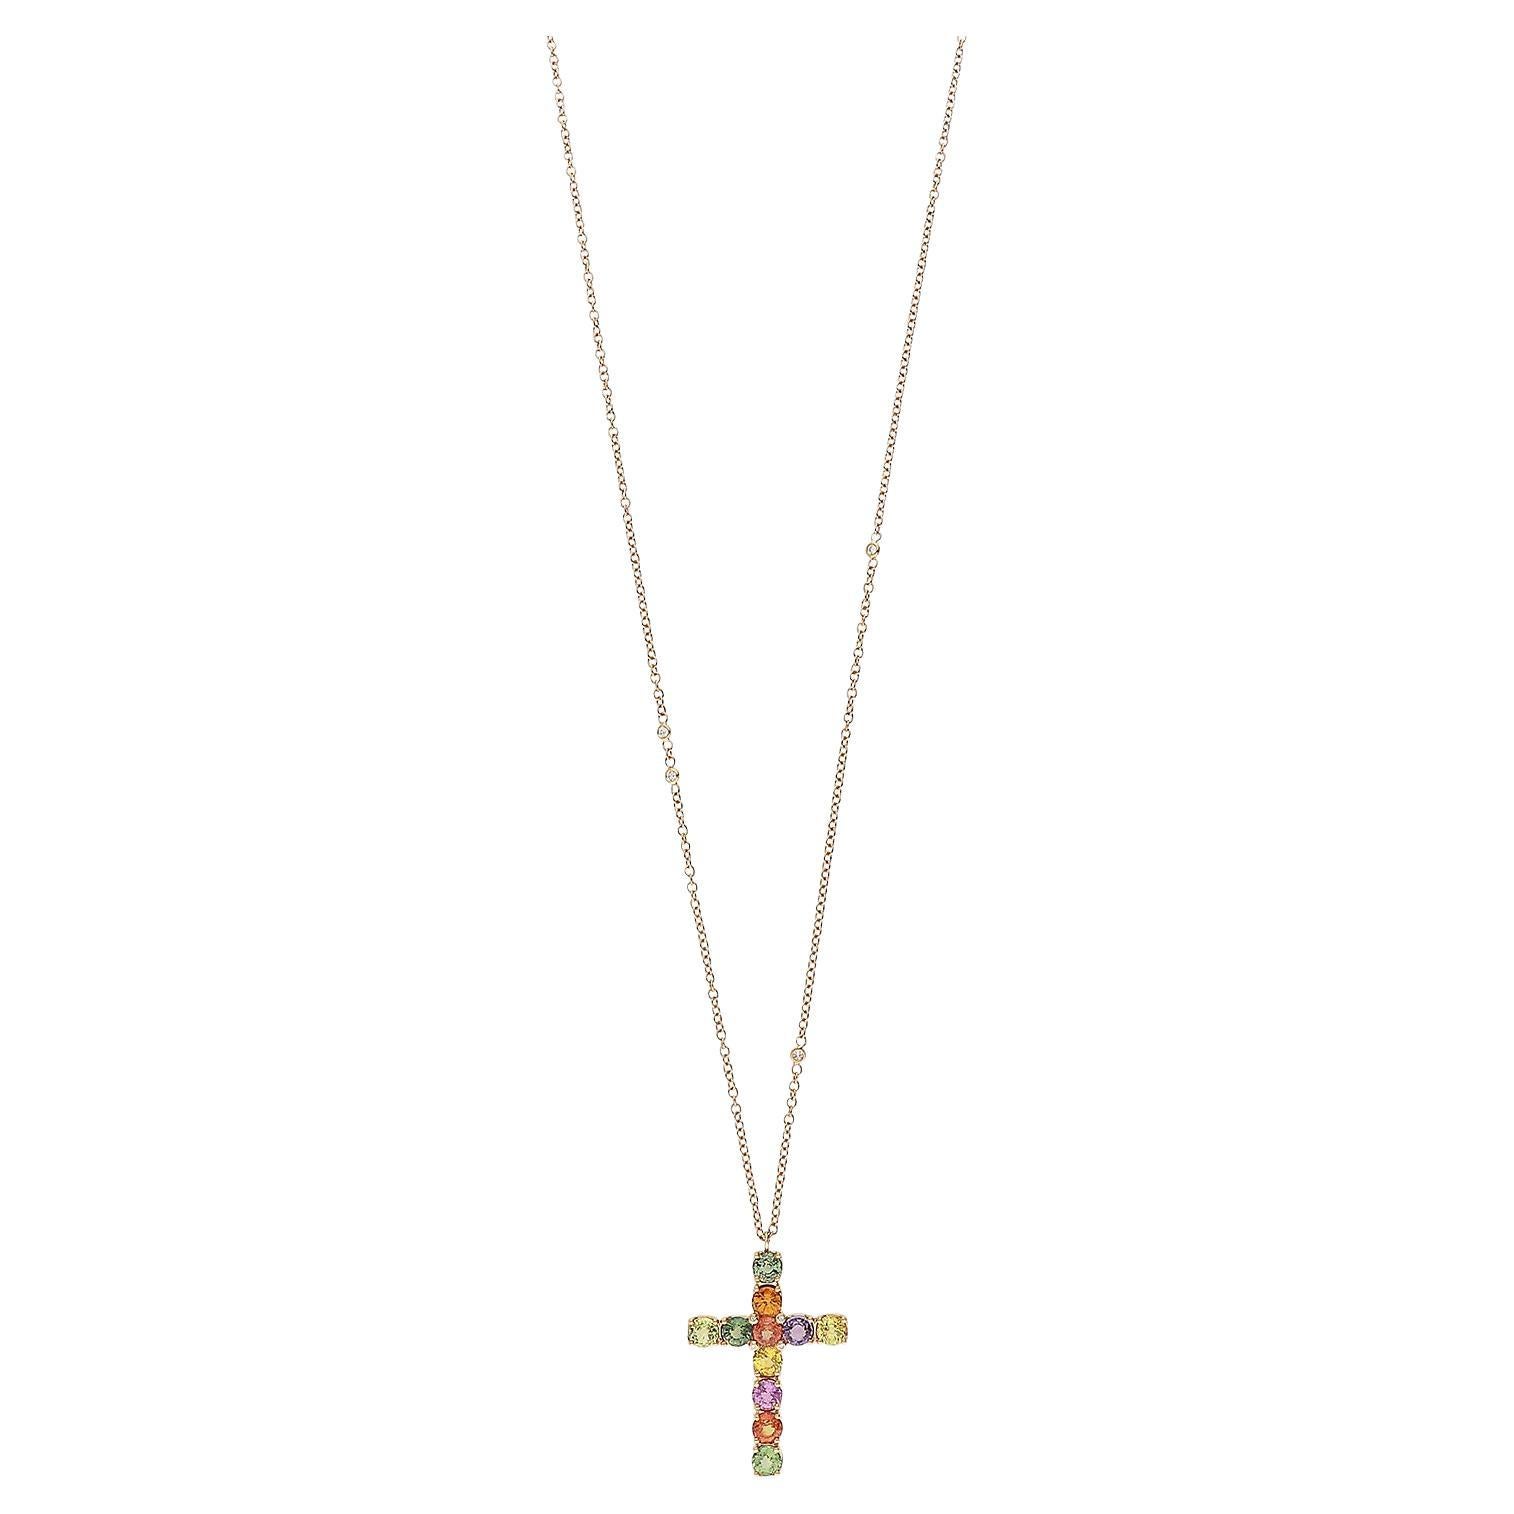 Pendant necklace with 18kt rose gold cross pendant For Sale